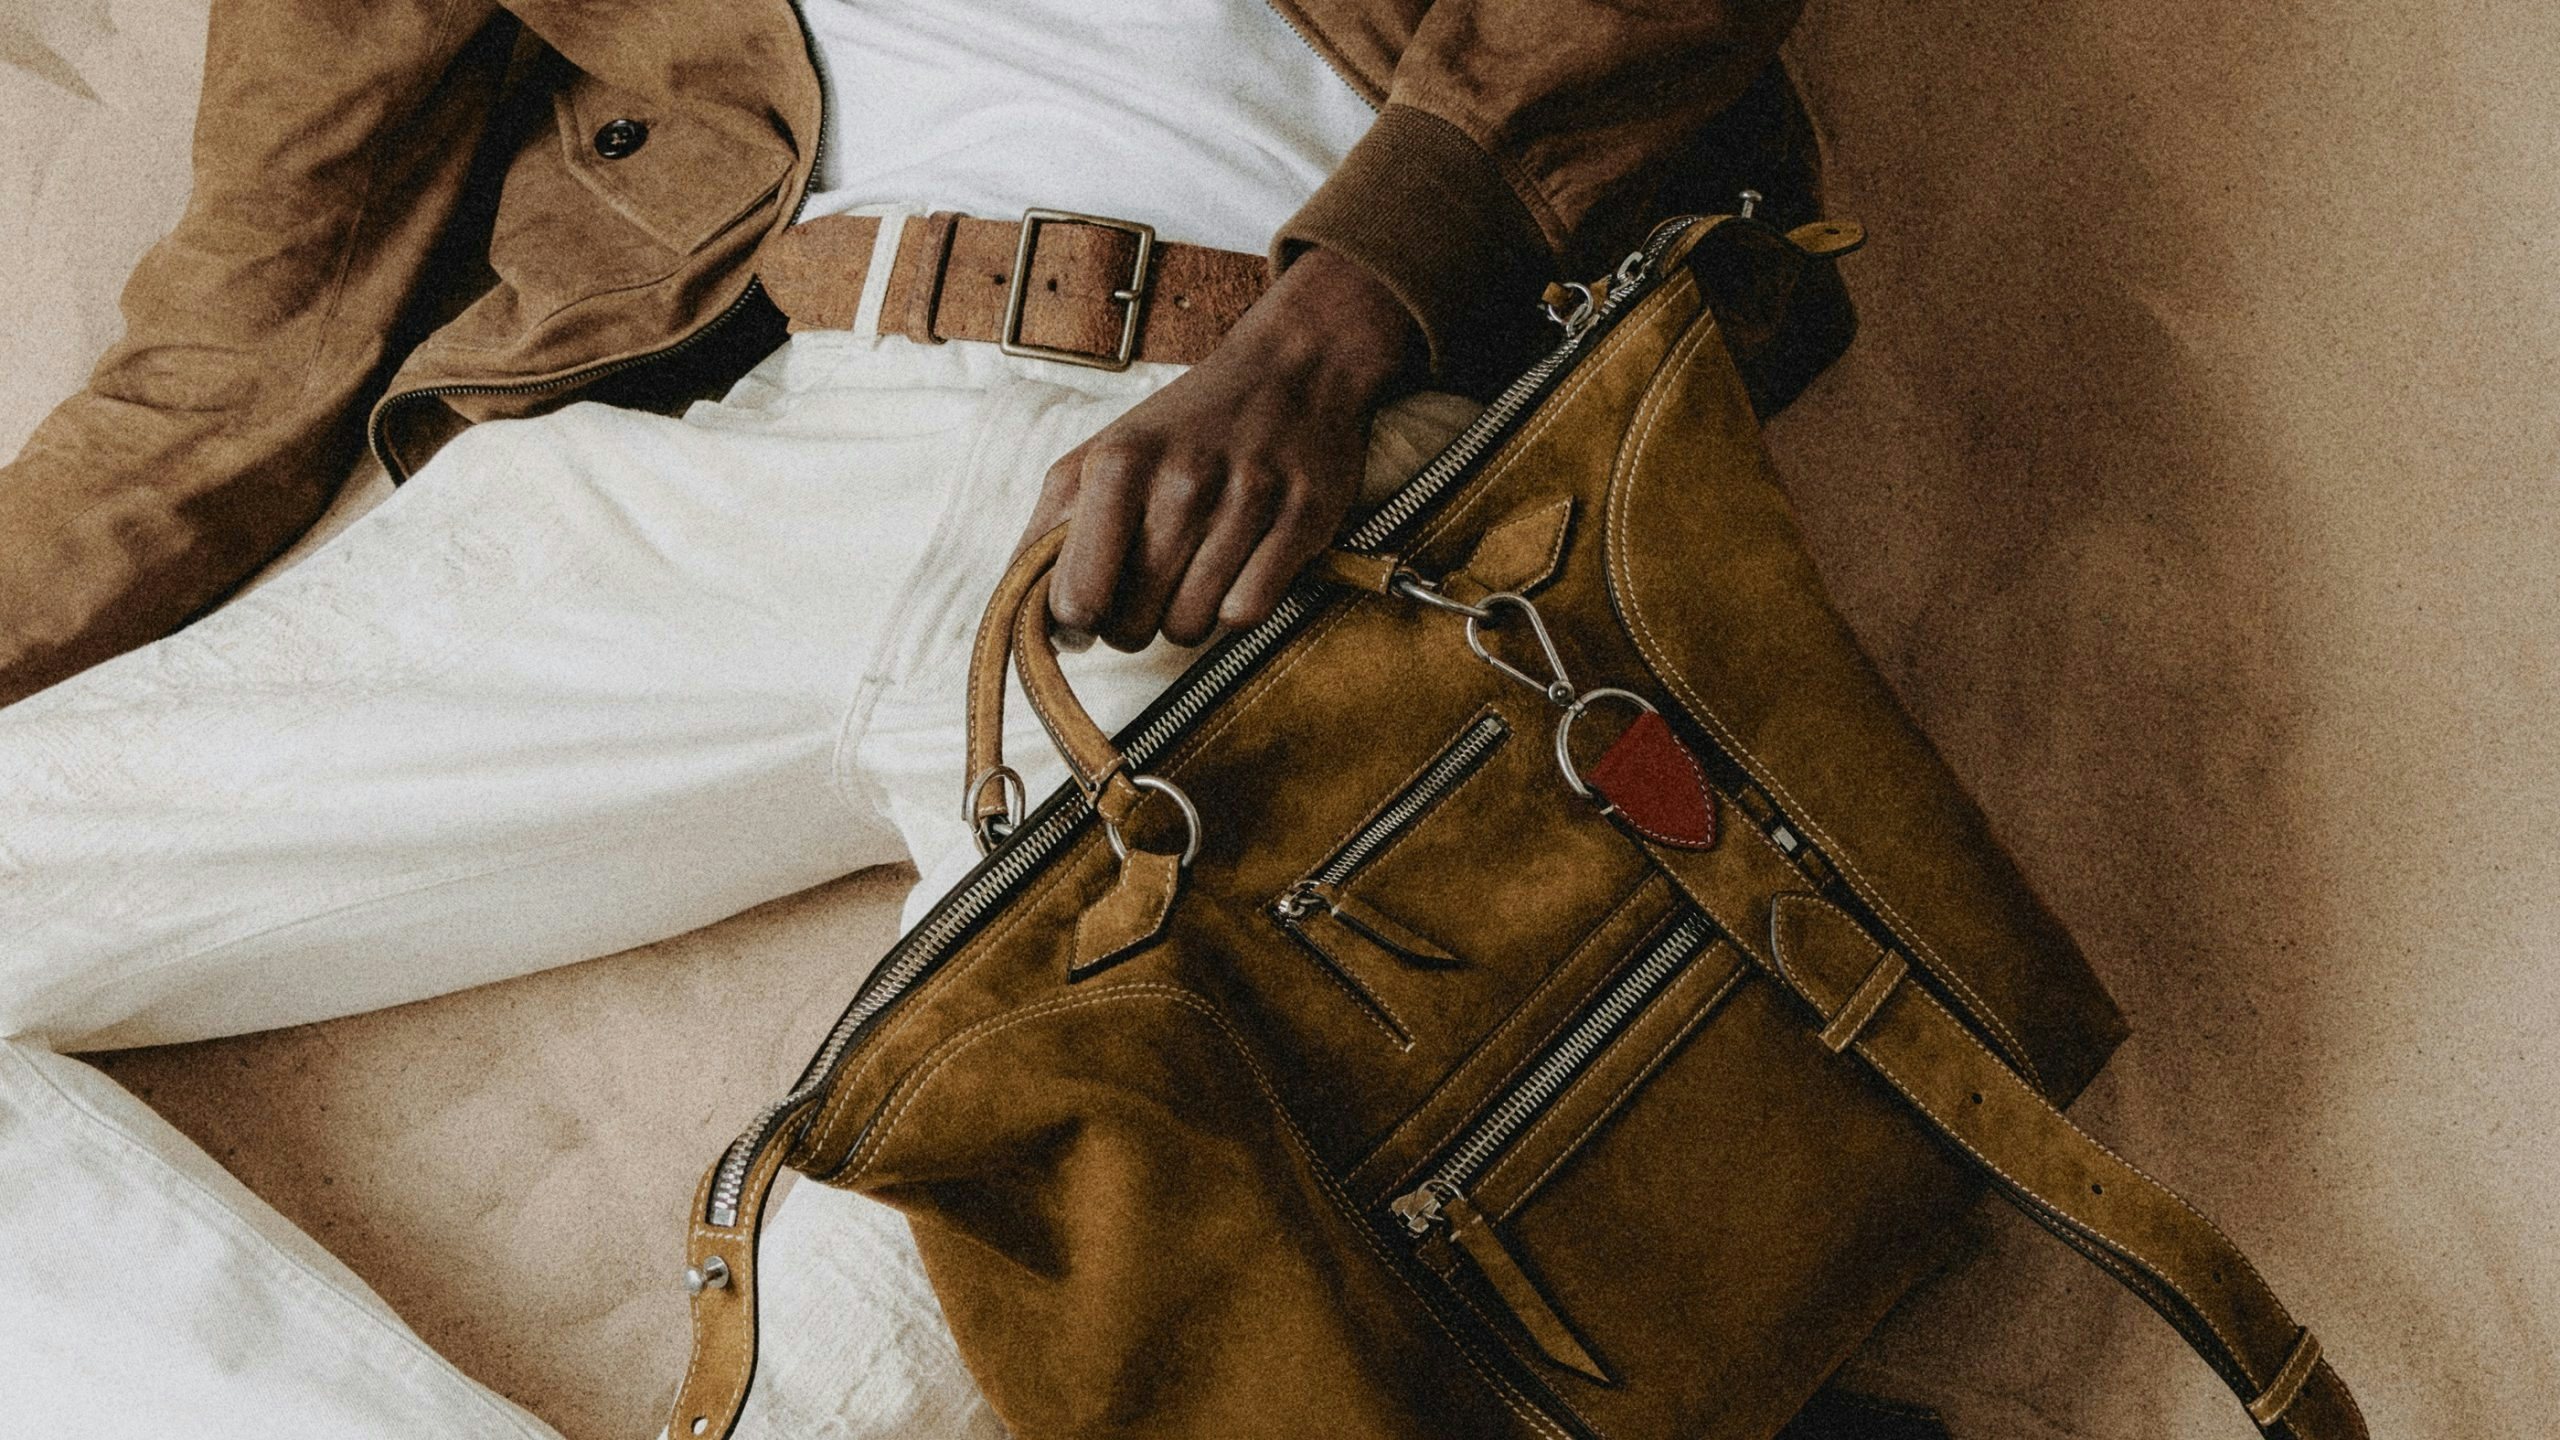 Capitalizing on the popularity of movie merchandise, Métier has collaborated with Indiana Jones IP. Photo: Métier